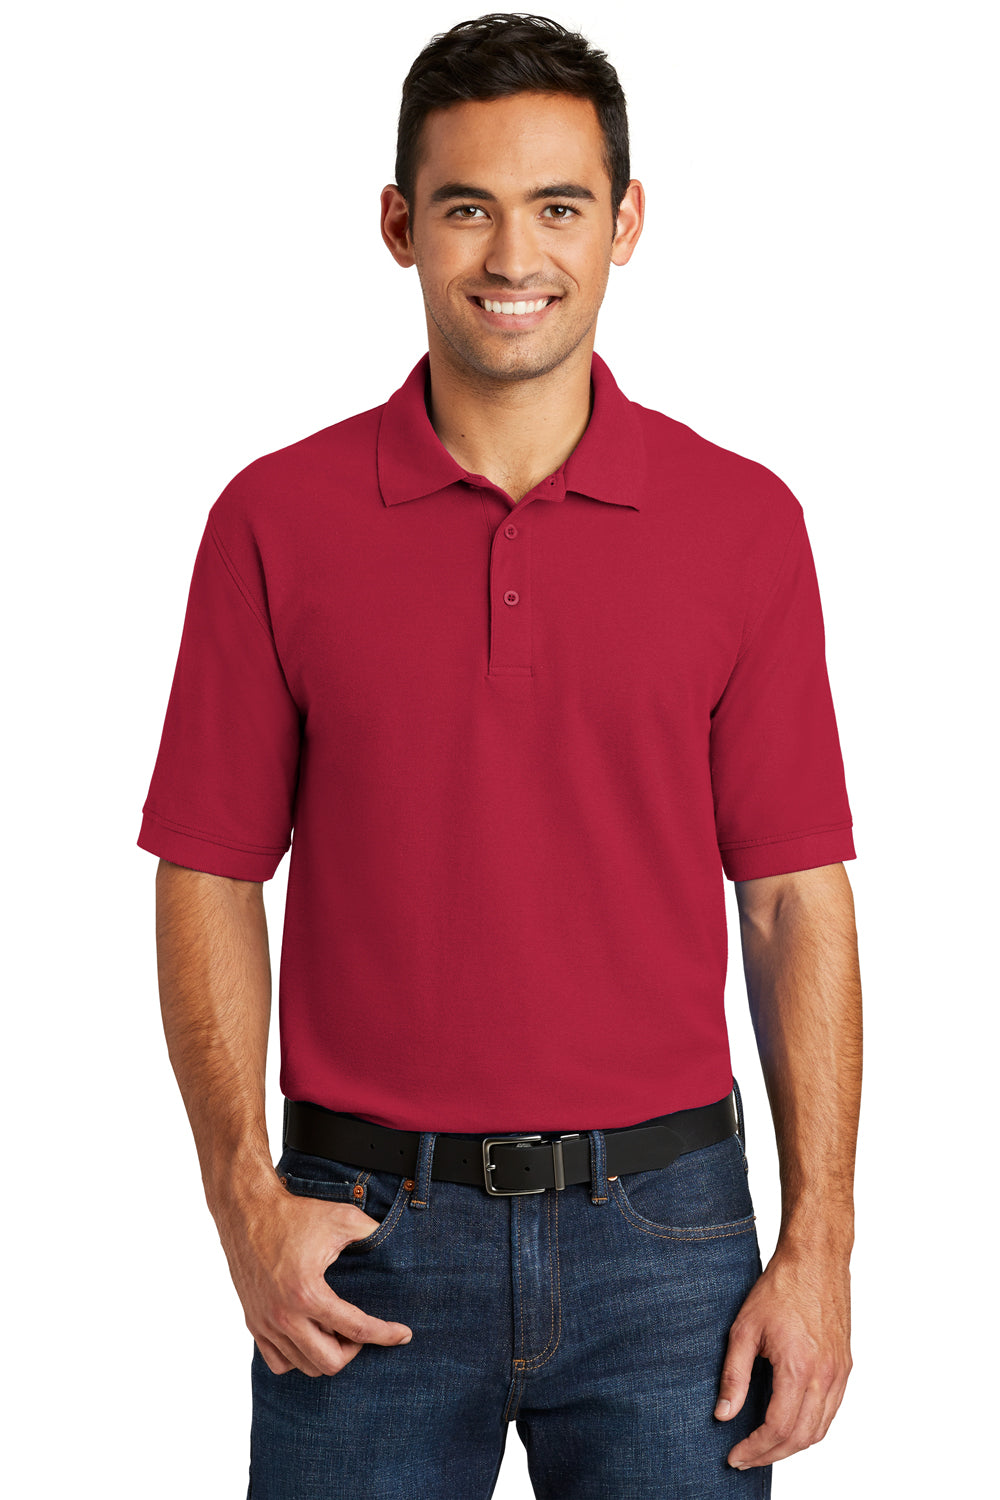 Port & Company KP155 Mens Core Stain Resistant Short Sleeve Polo Shirt Red Front